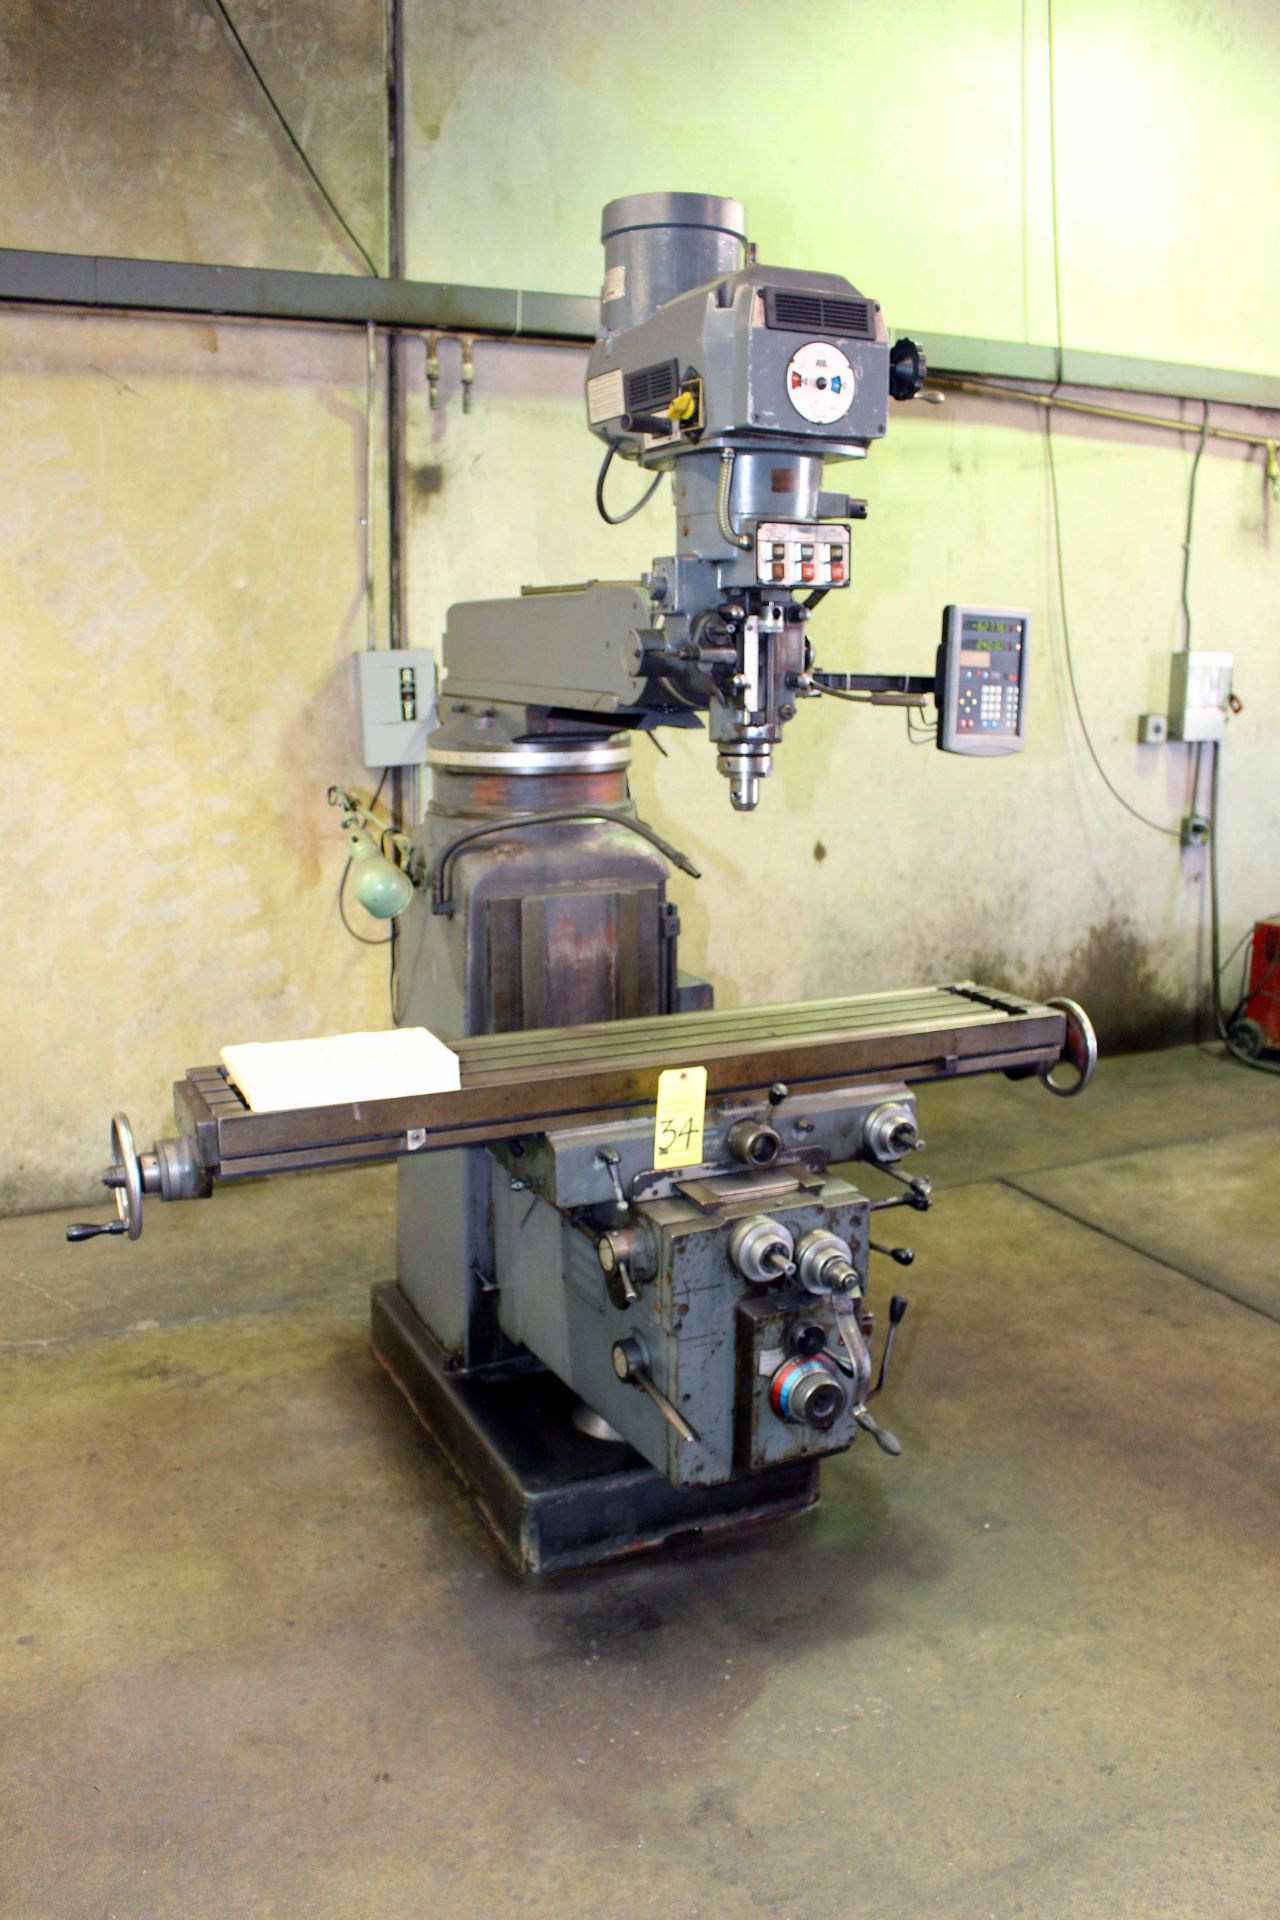 VERTICAL TURRET MILL, LAGUN MDL. FTV4, 11" x 58" table, #40 NST spdl. taper, 3-way pwr. feeds, 2-